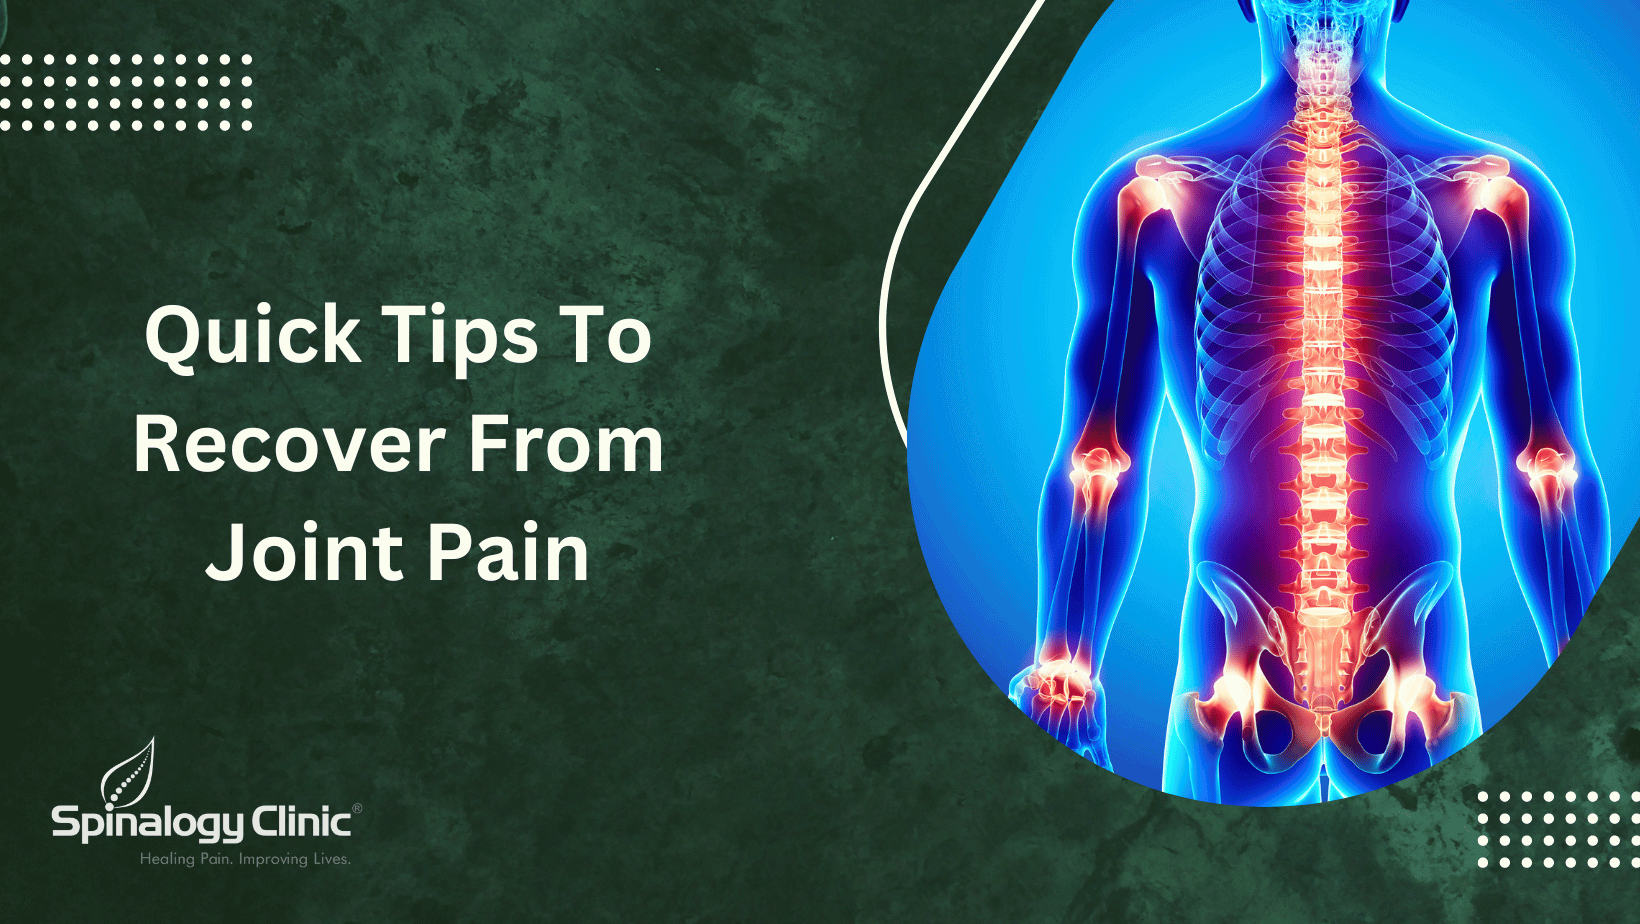 Quick Tips To Recover From Joint Pain